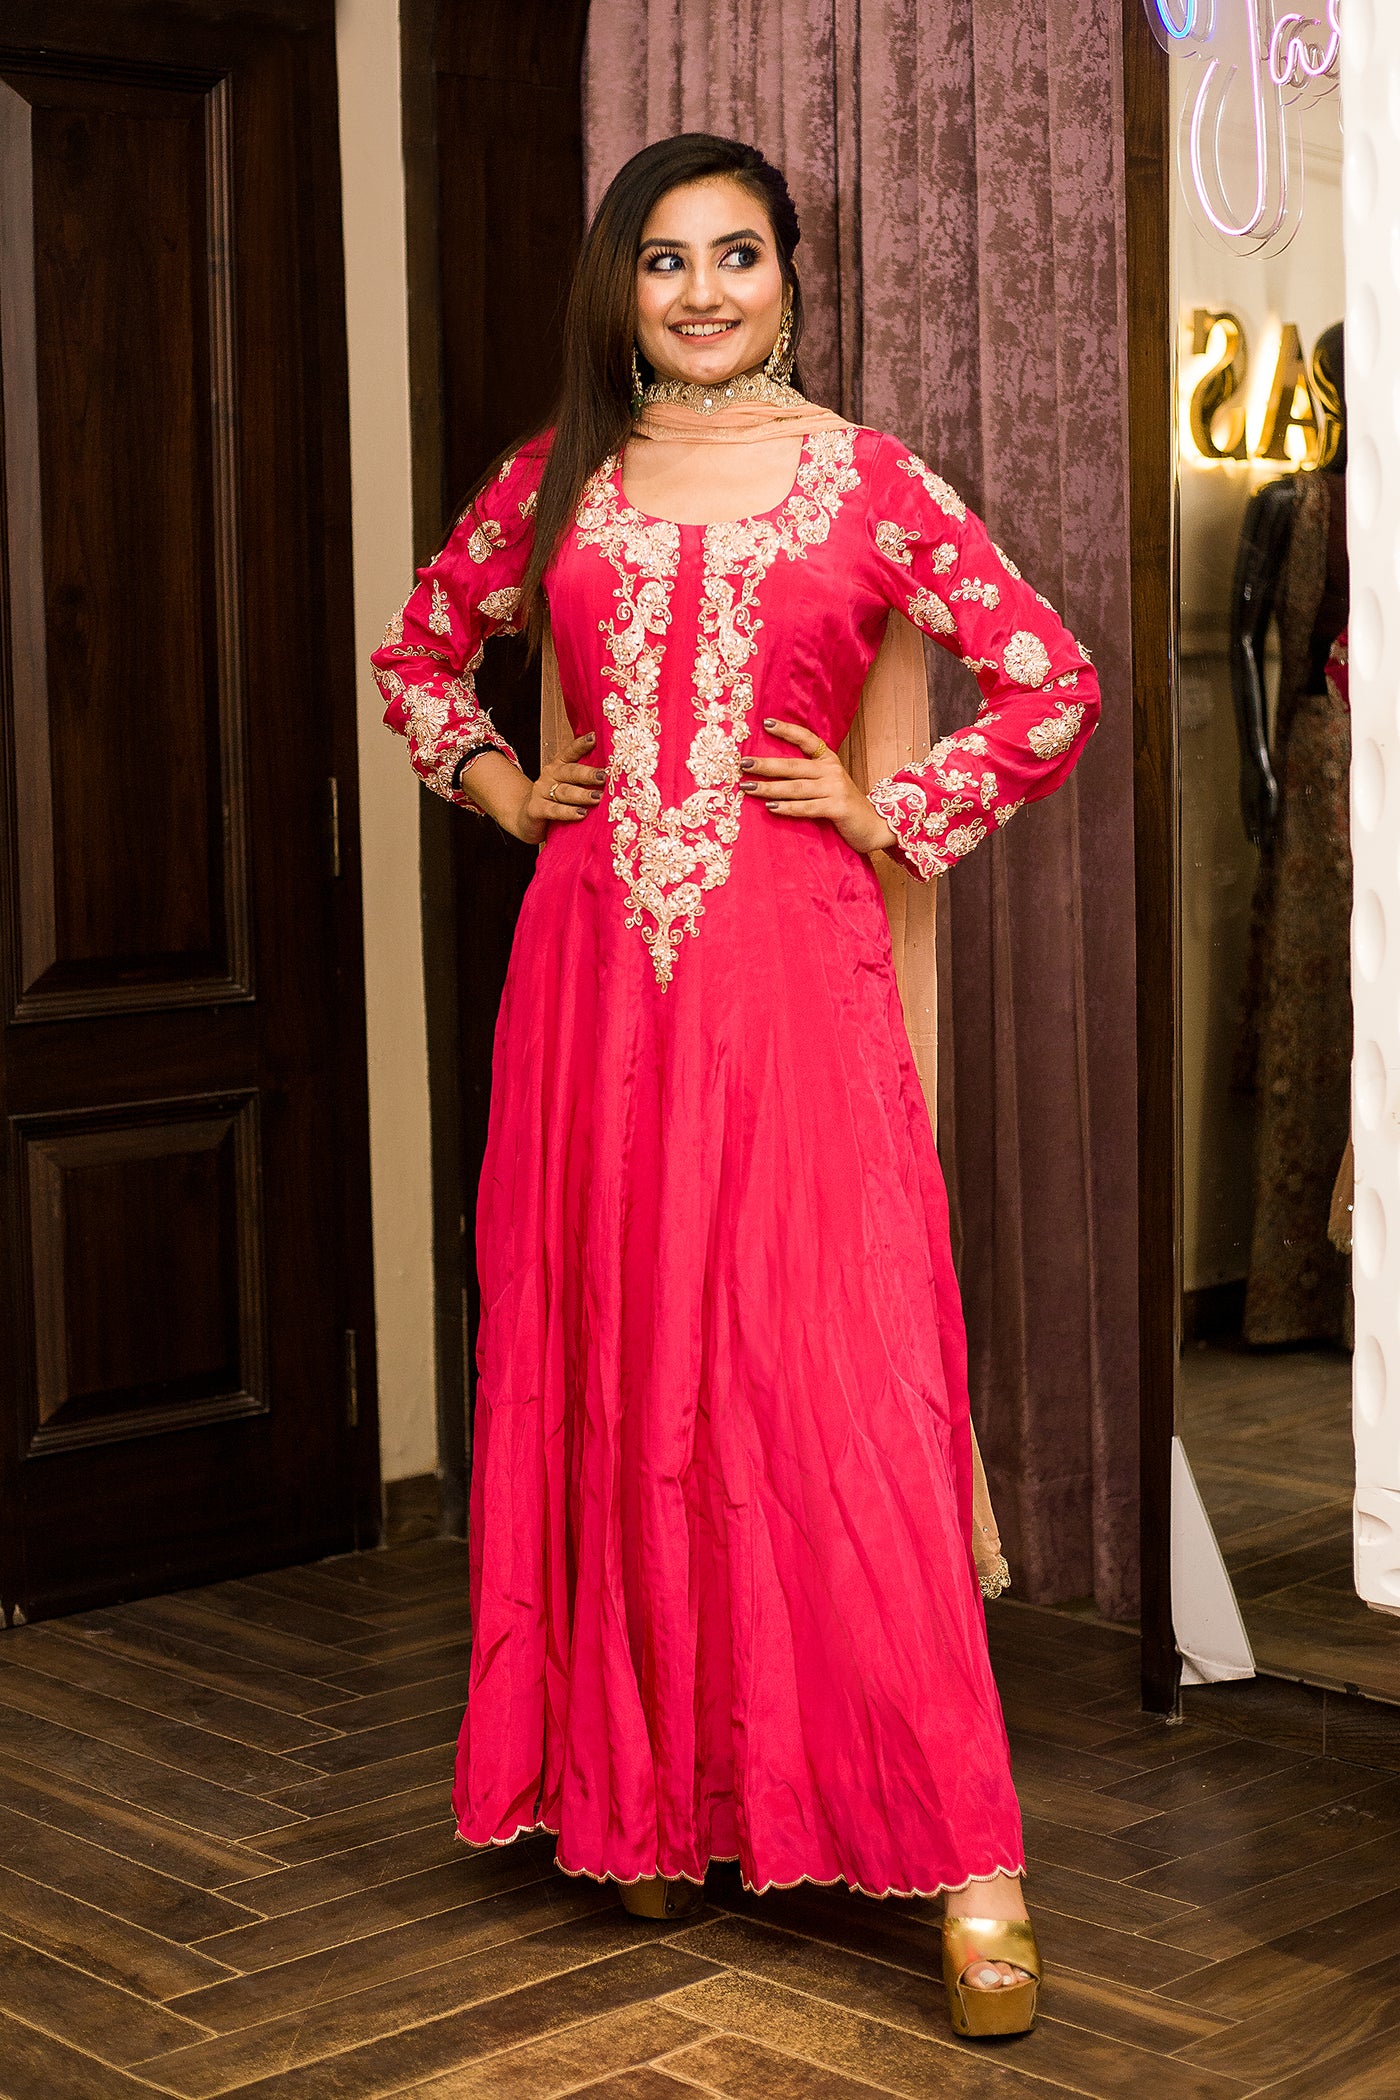 Strawberry Pink Embroidered Anarkali Indian Clothing in Denver, CO, Aurora, CO, Boulder, CO, Fort Collins, CO, Colorado Springs, CO, Parker, CO, Highlands Ranch, CO, Cherry Creek, CO, Centennial, CO, and Longmont, CO. NATIONWIDE SHIPPING USA- India Fashion X